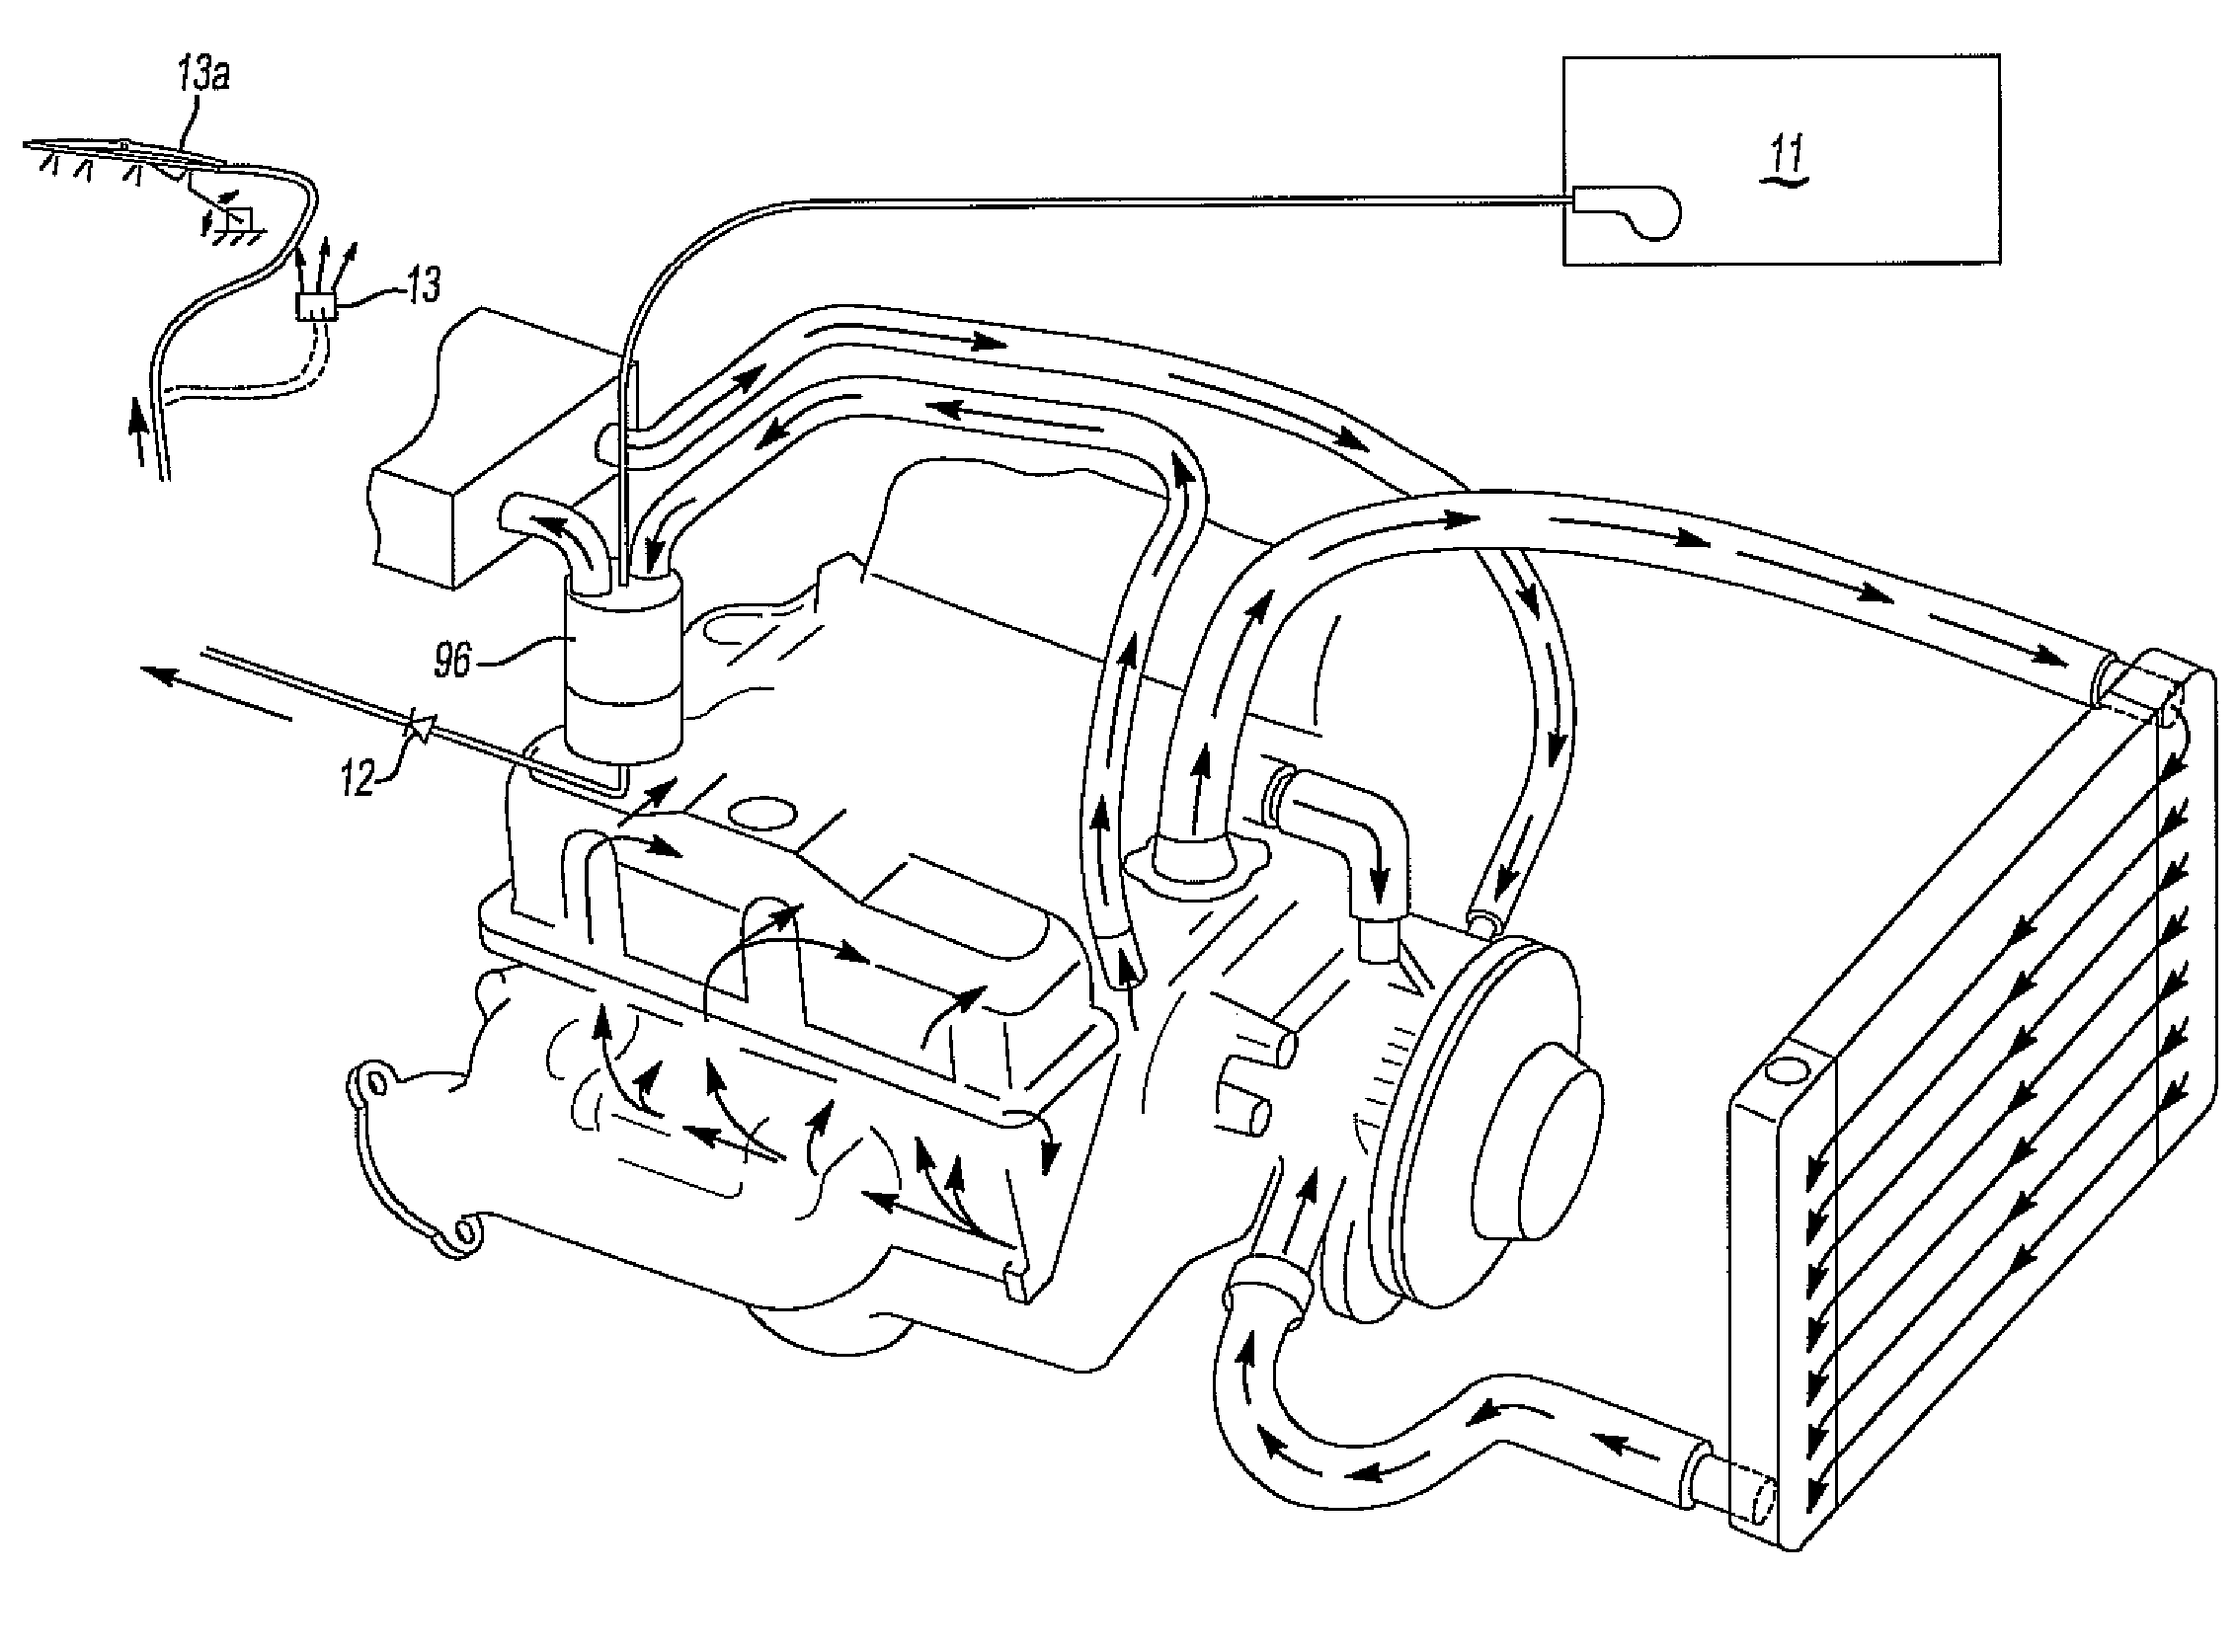 Windshield washer fluid heater and system